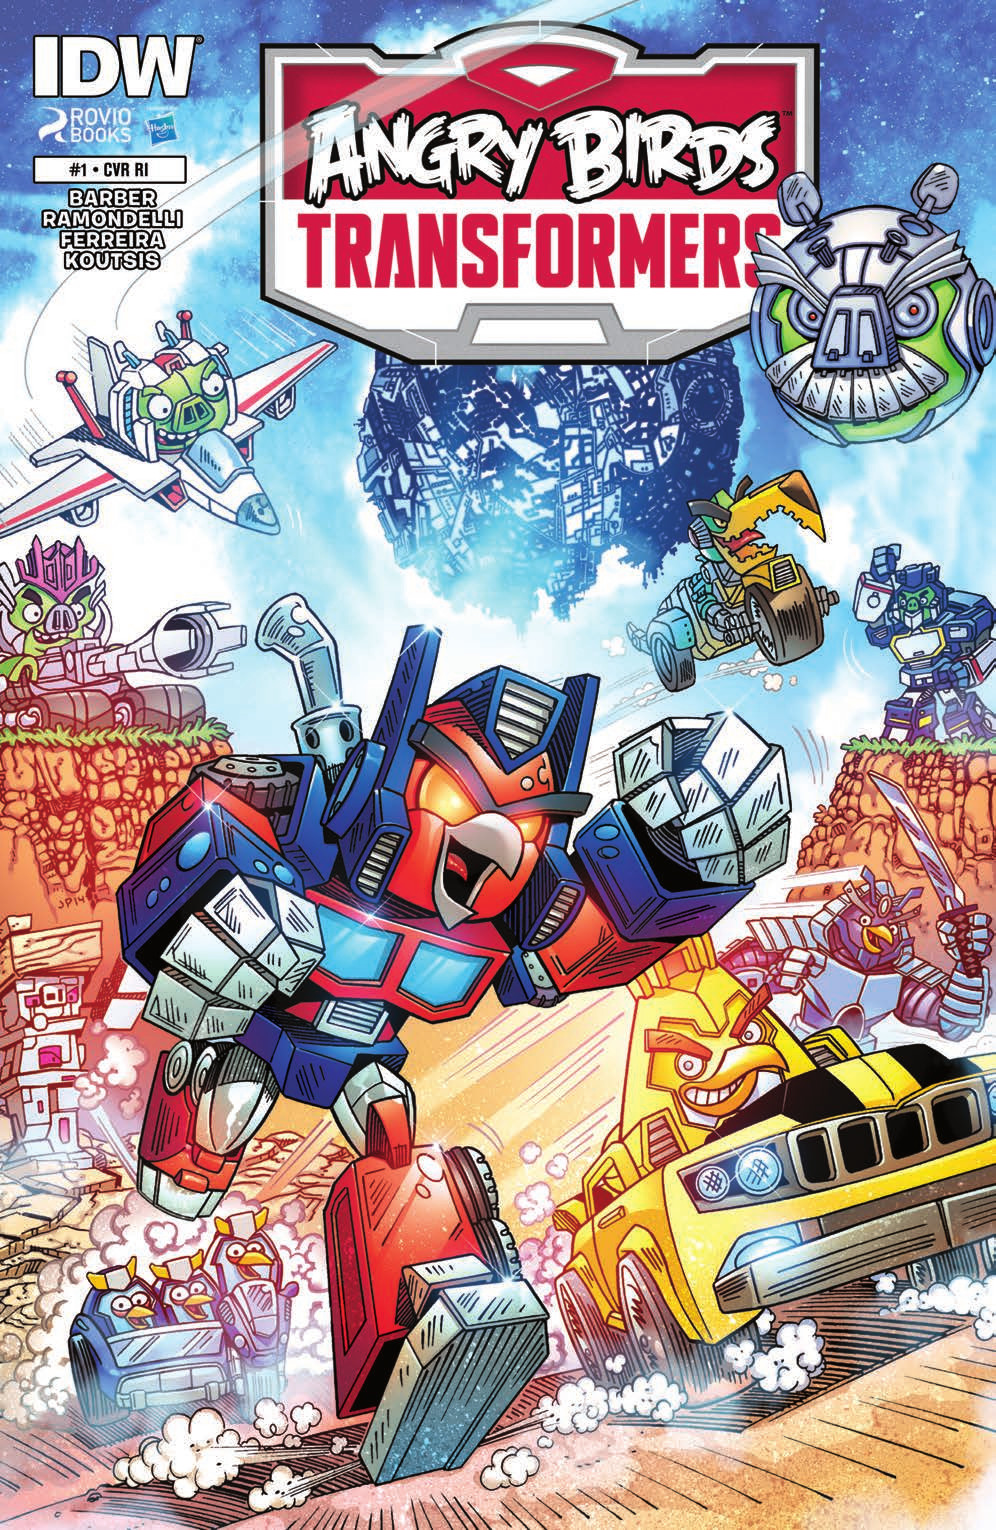 IDW Angry Birds Transformers #1 Review